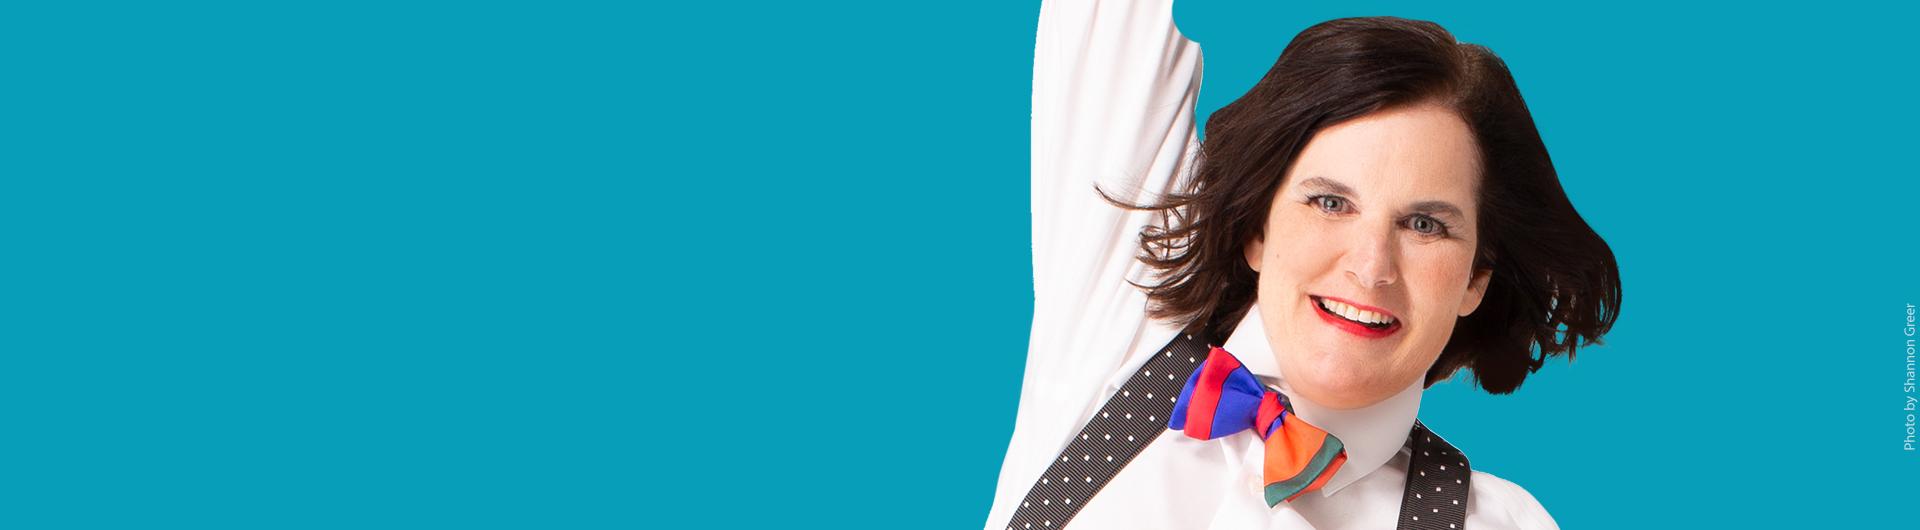 Paula Poundstone in a white shirt, suspenders, and colorful bow tie with one arm reaching upwards.